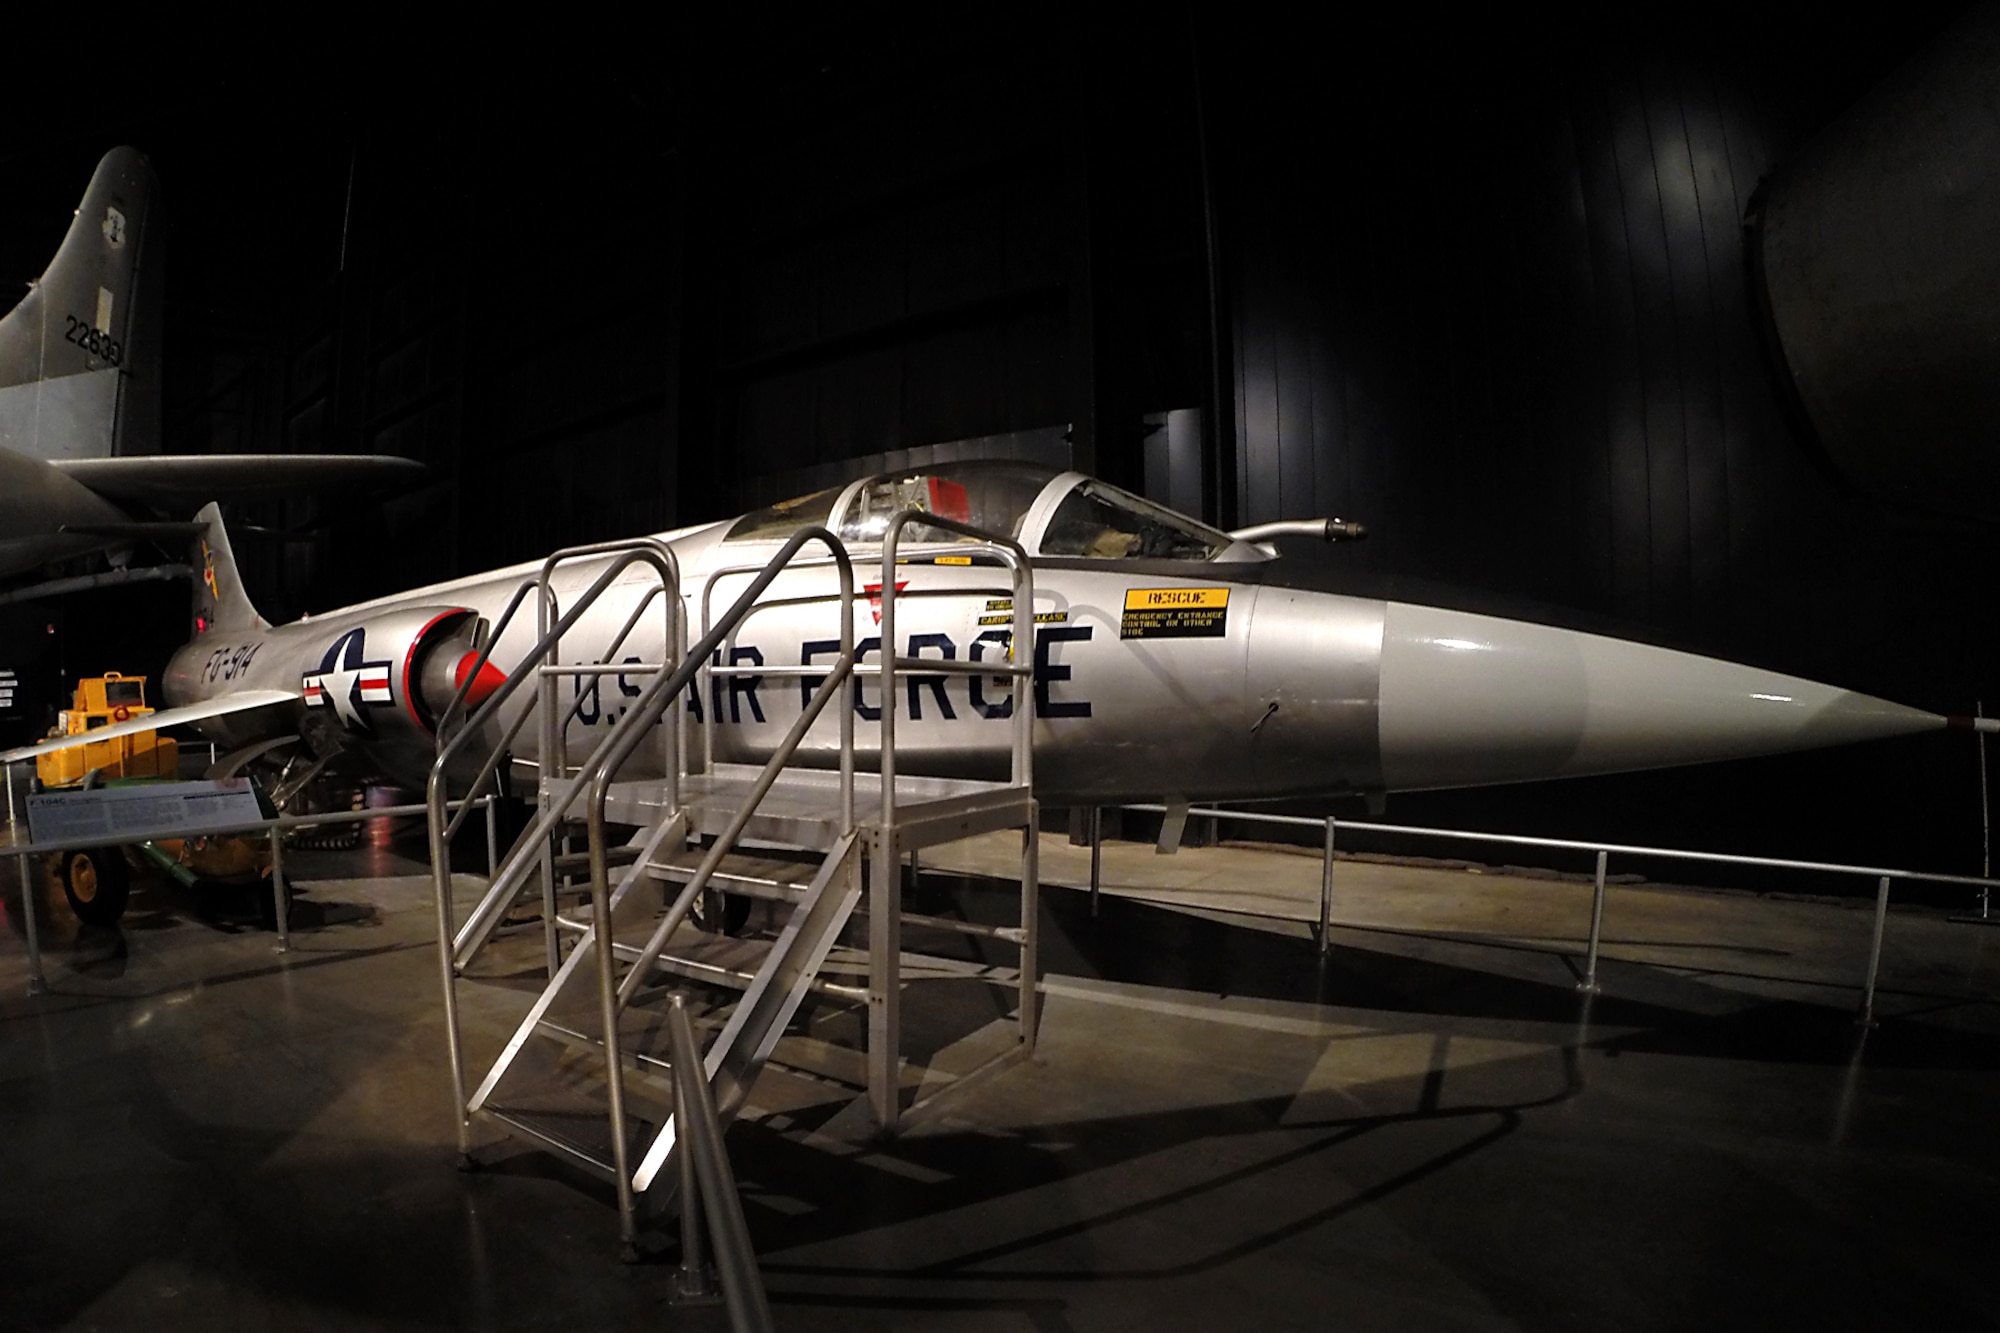 Lockheed F-104C Starfighter in the Cold War Gallery at the National Museum of the United States Air Force. (U.S. Air Force photo)
